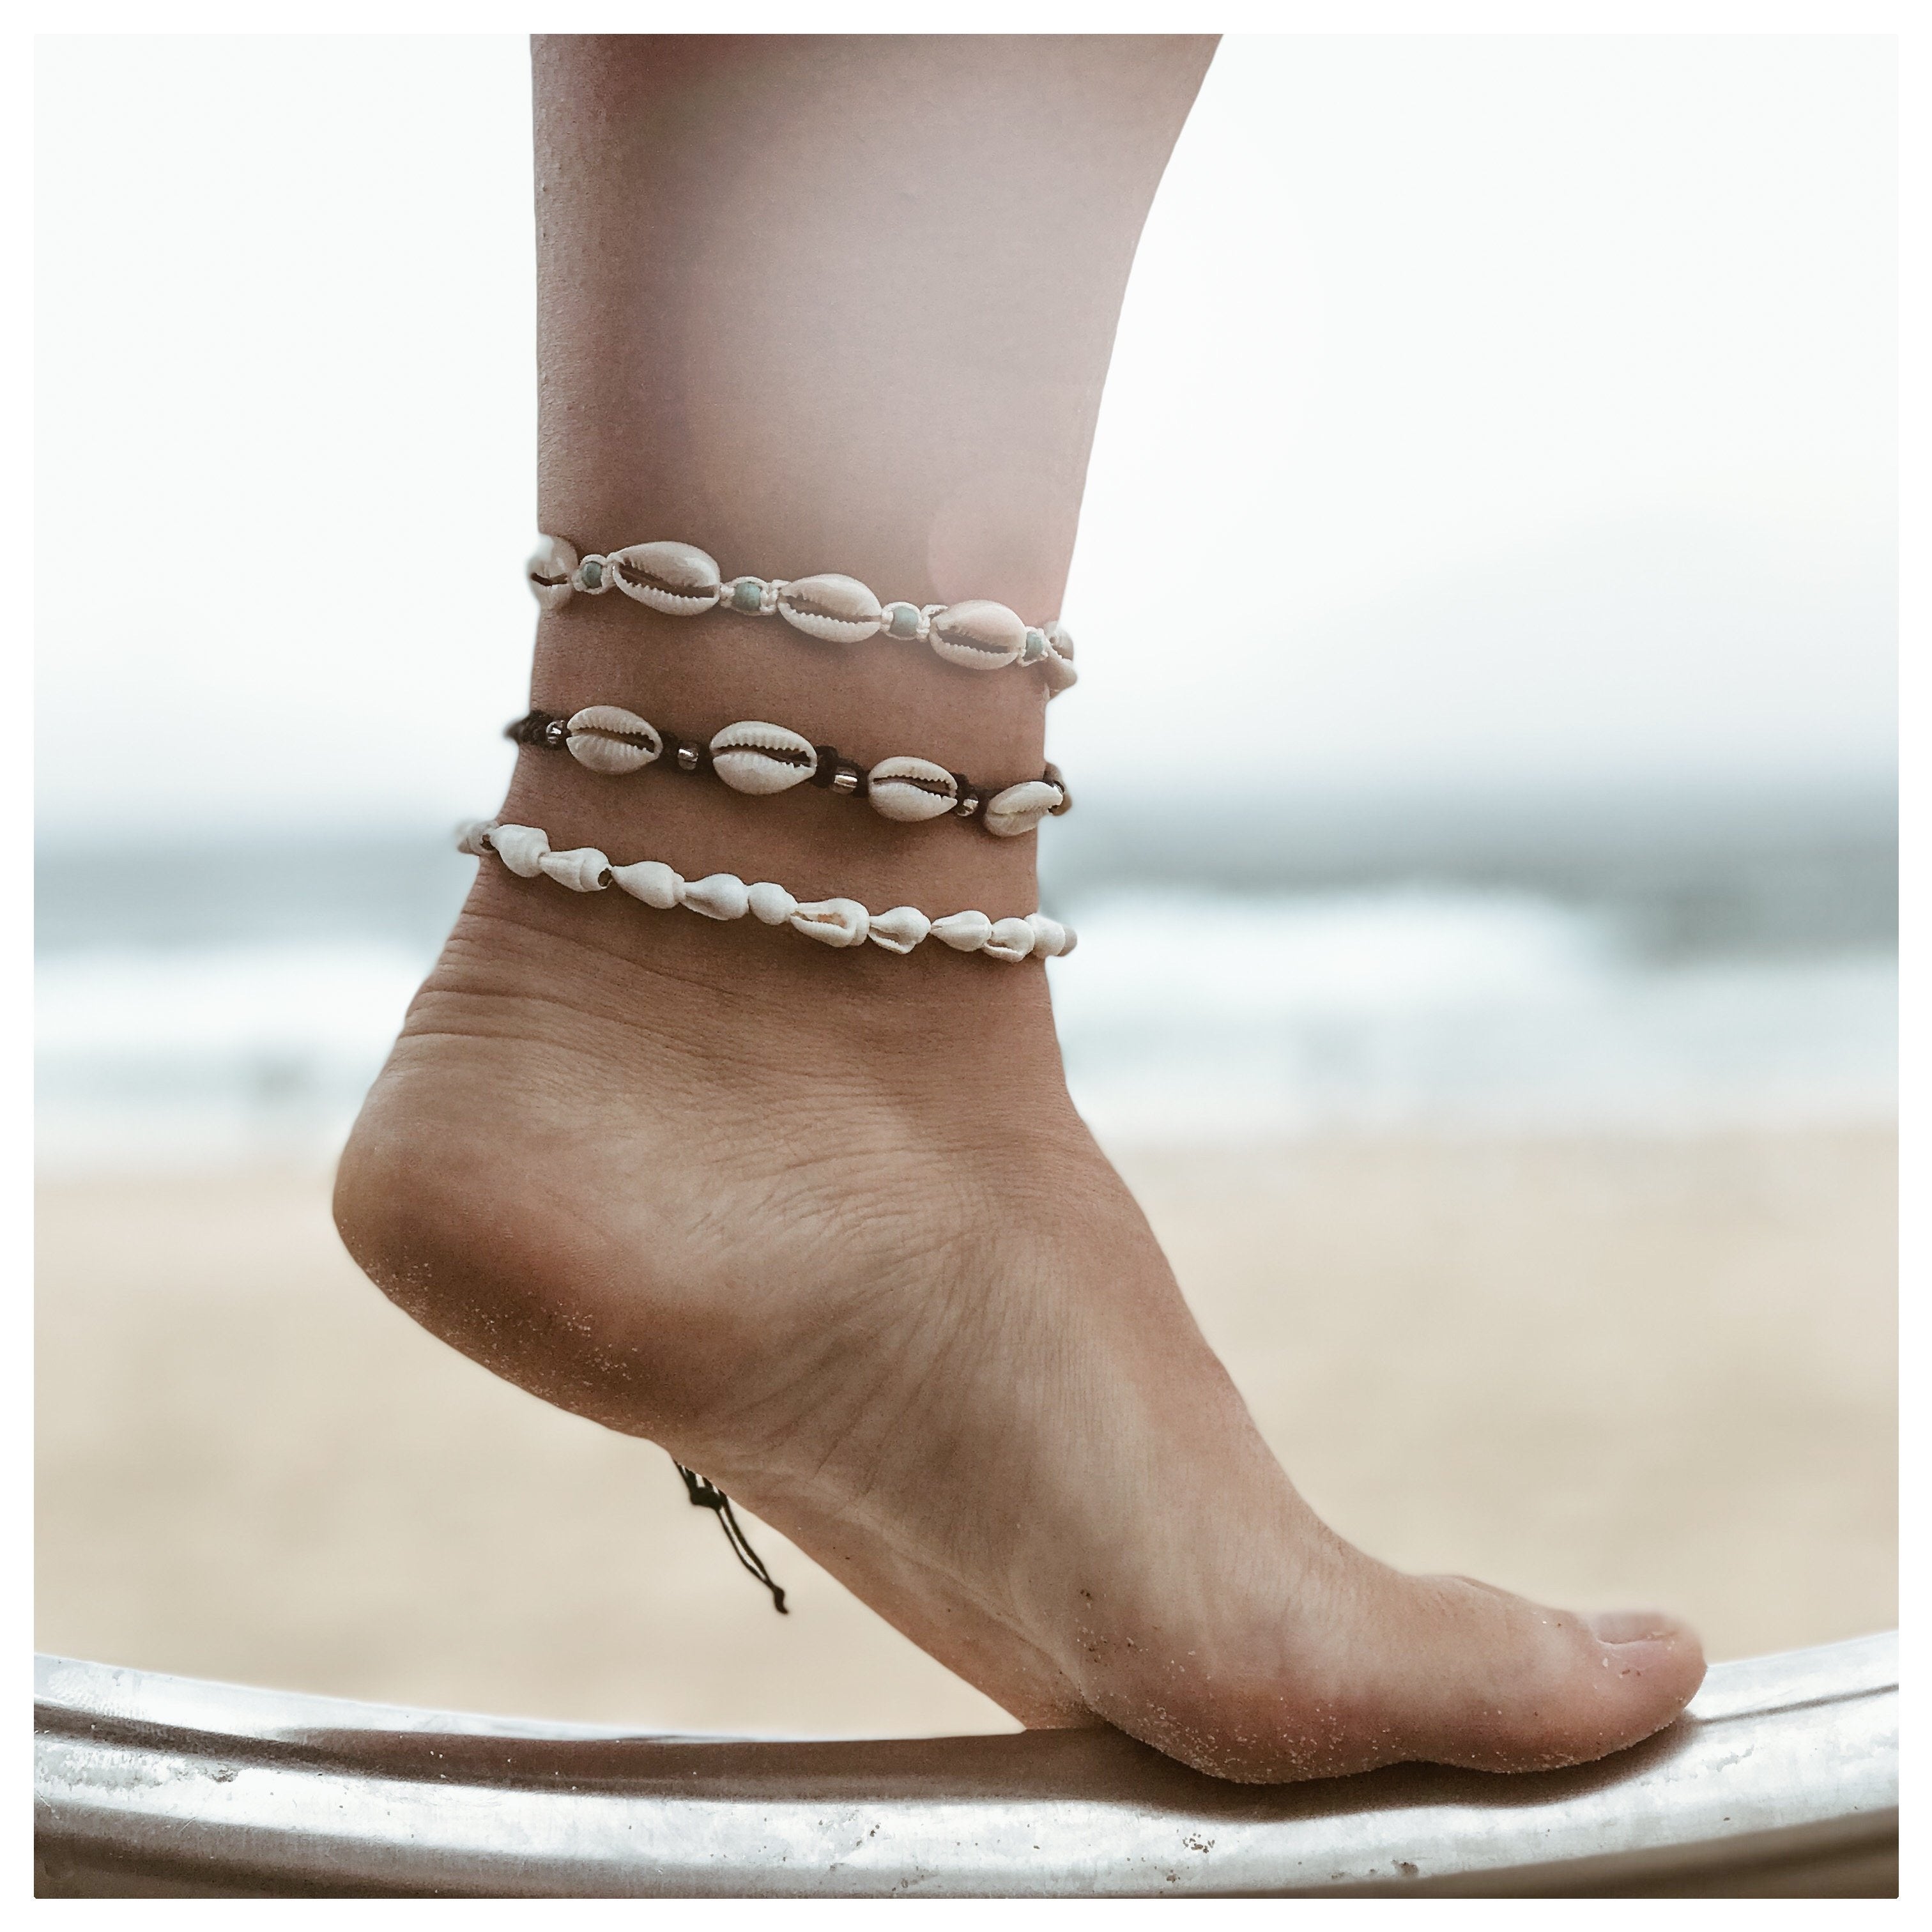 Poppy Pearl & Glass Beaded Anklet - Turquoise - Arms Of Eve